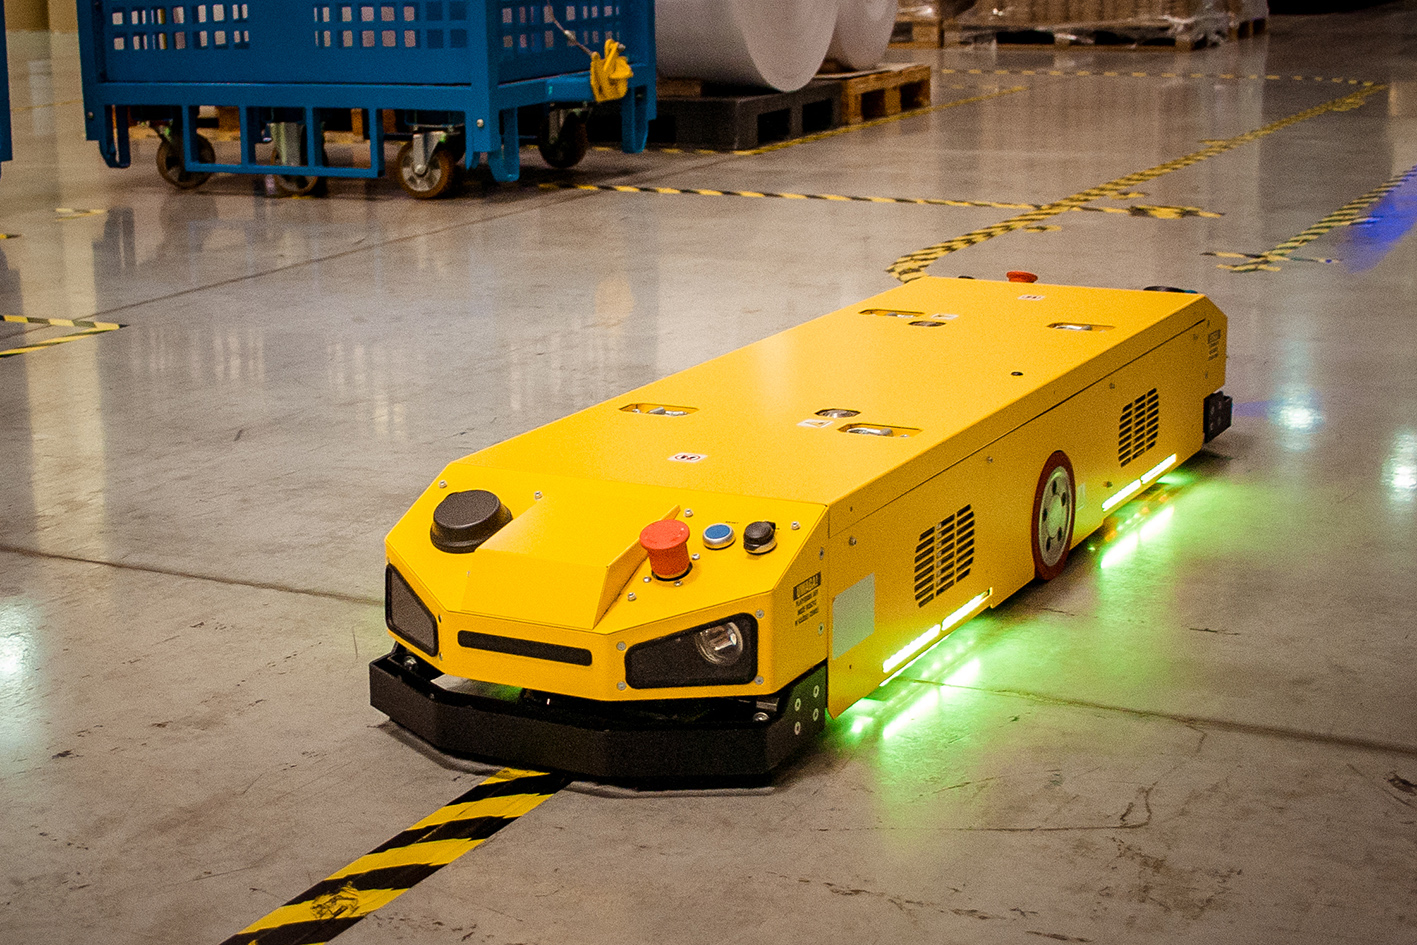 Efficient intralogistics with AGV robots (Automated Guided Vehicle